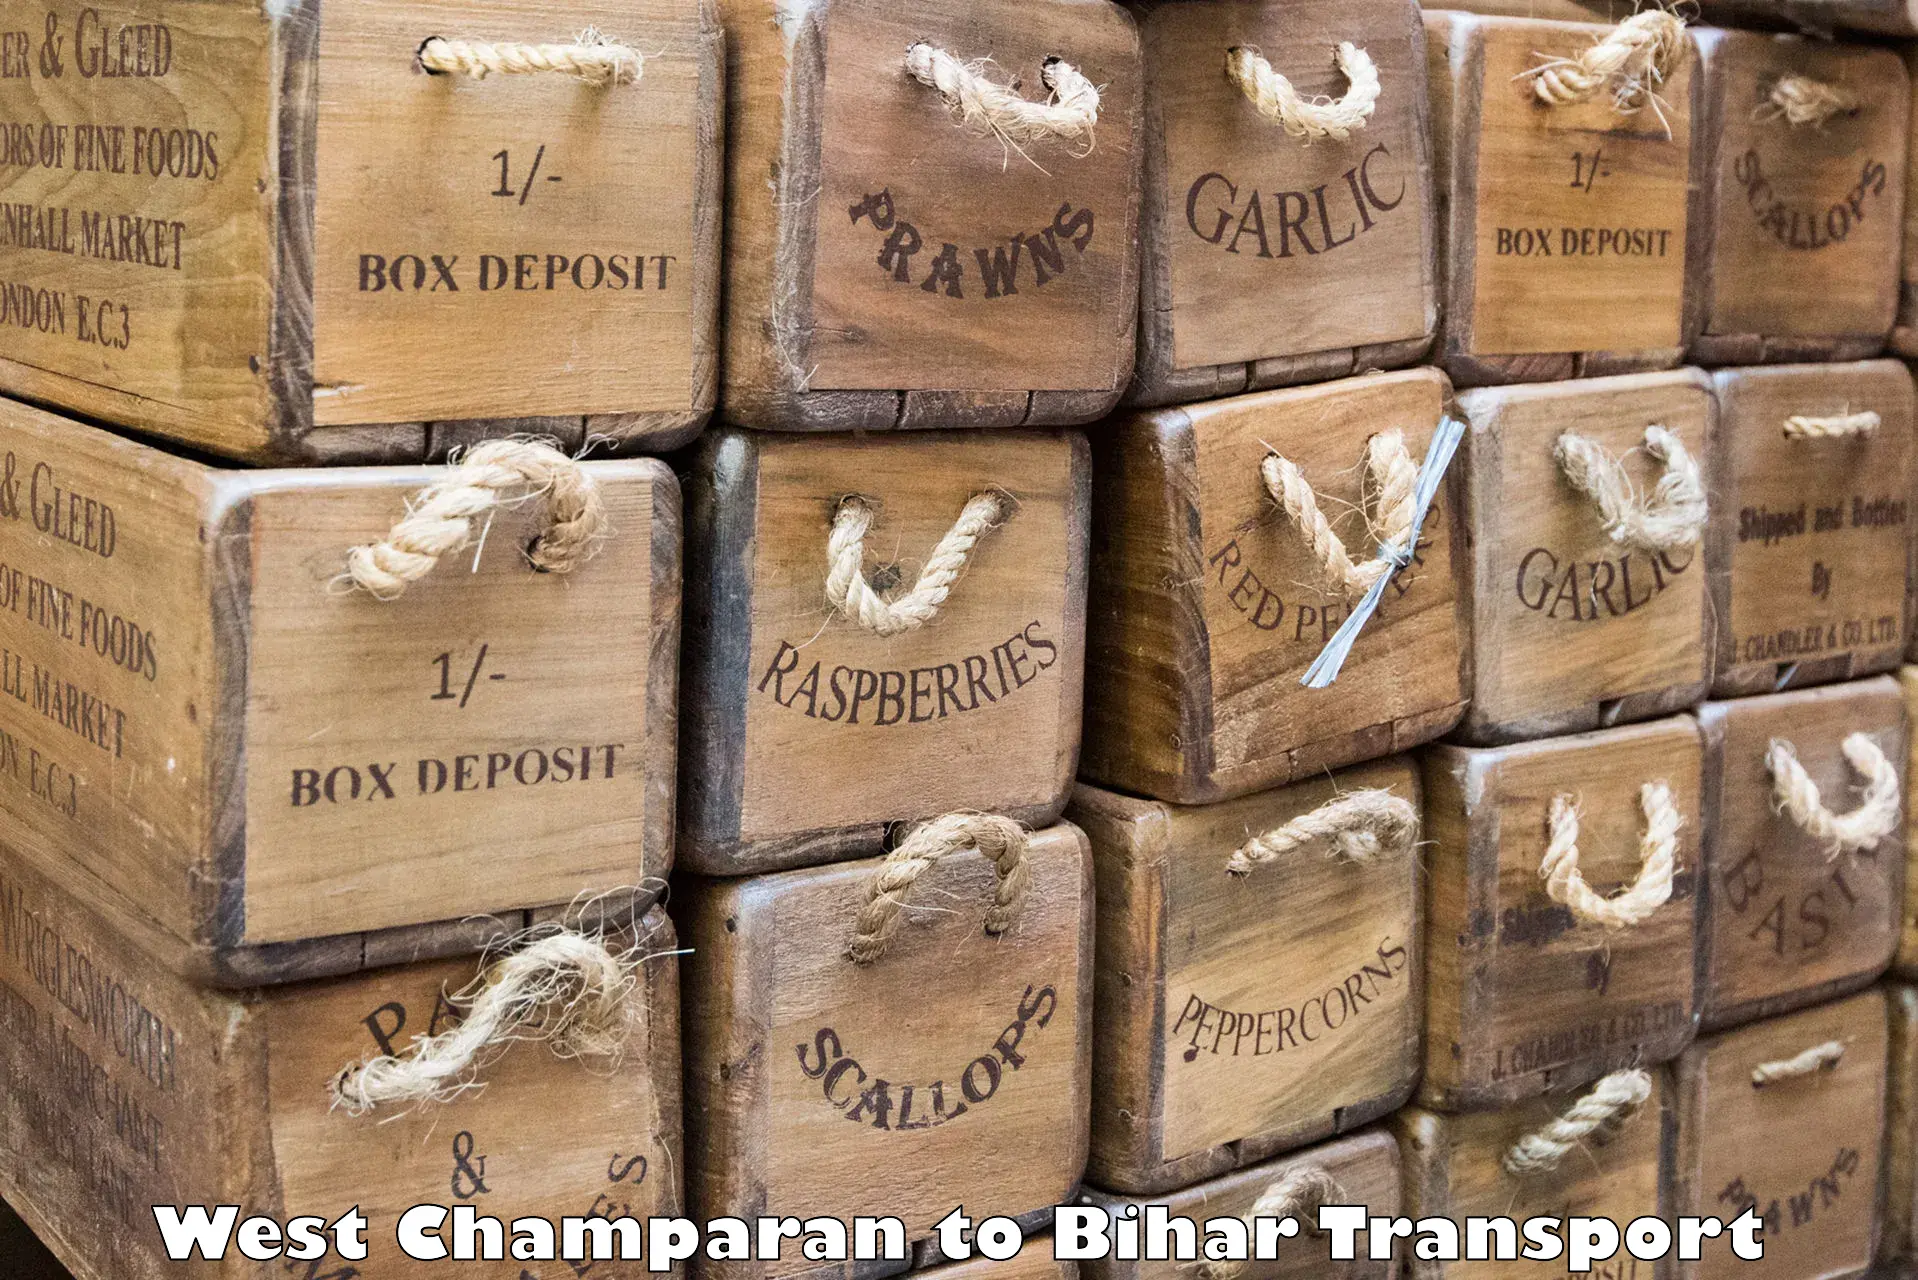 Air cargo transport services West Champaran to Vaishali